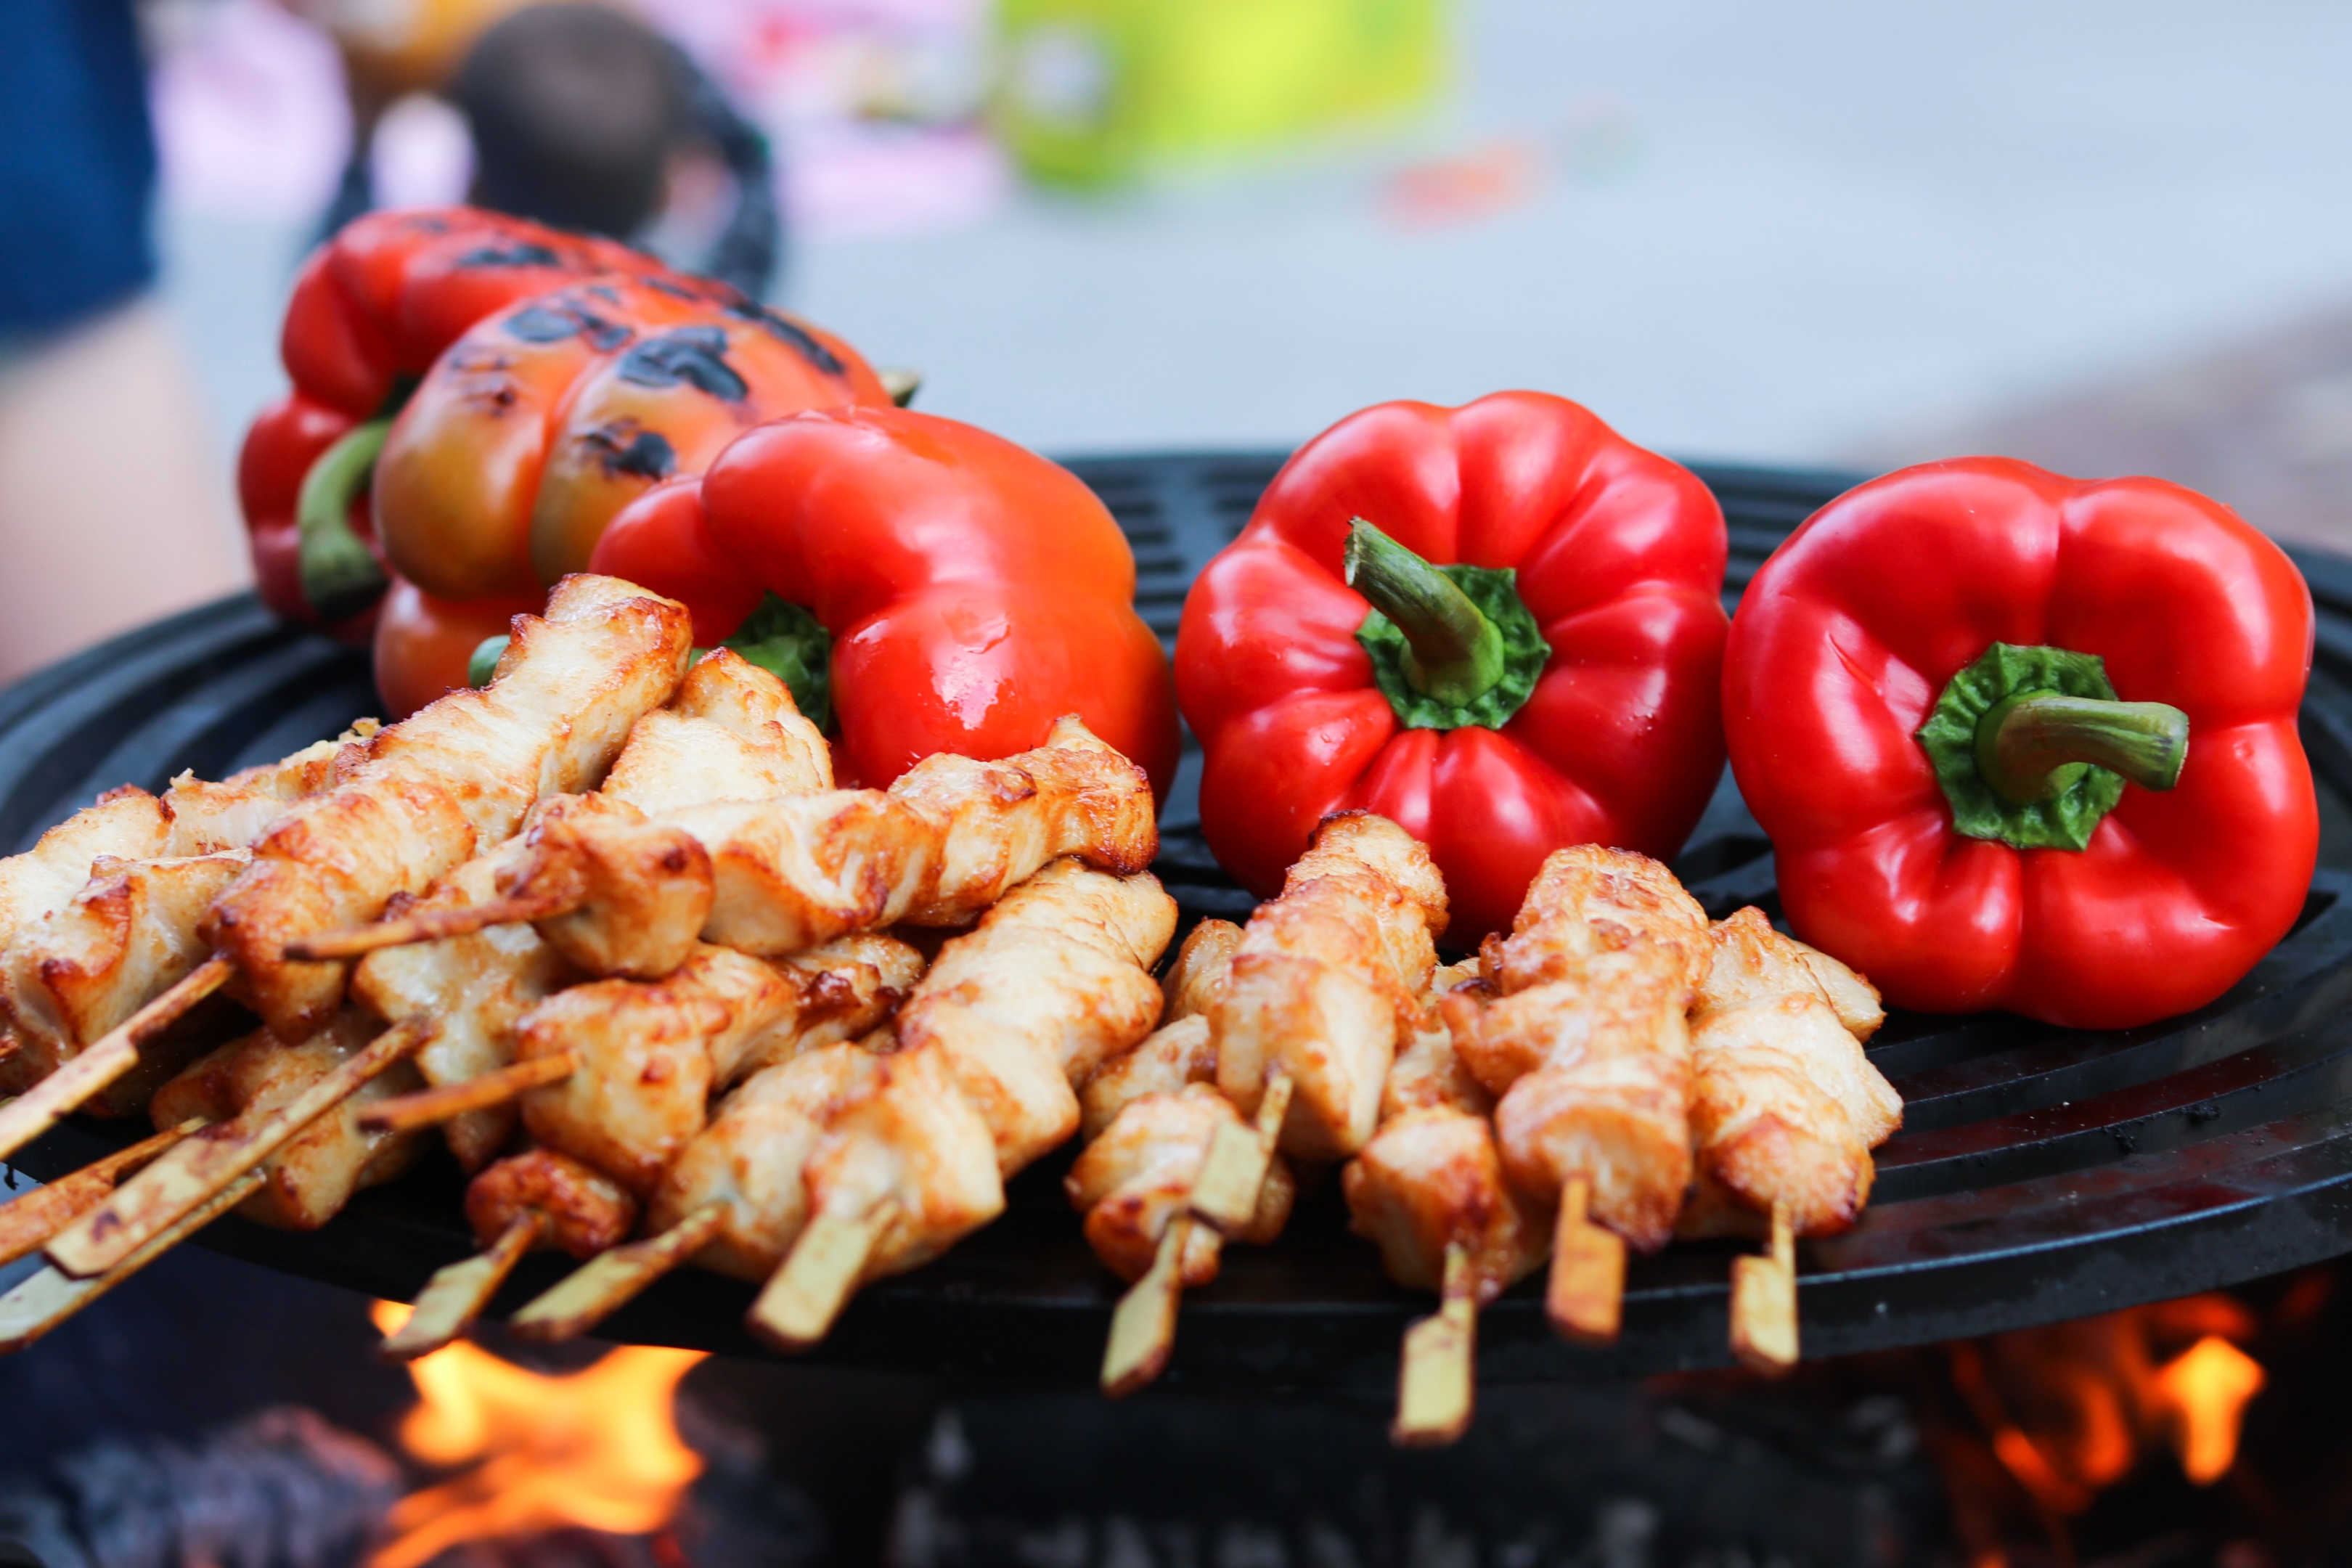 Cooking vegetables with your grilled meat provides health benefits